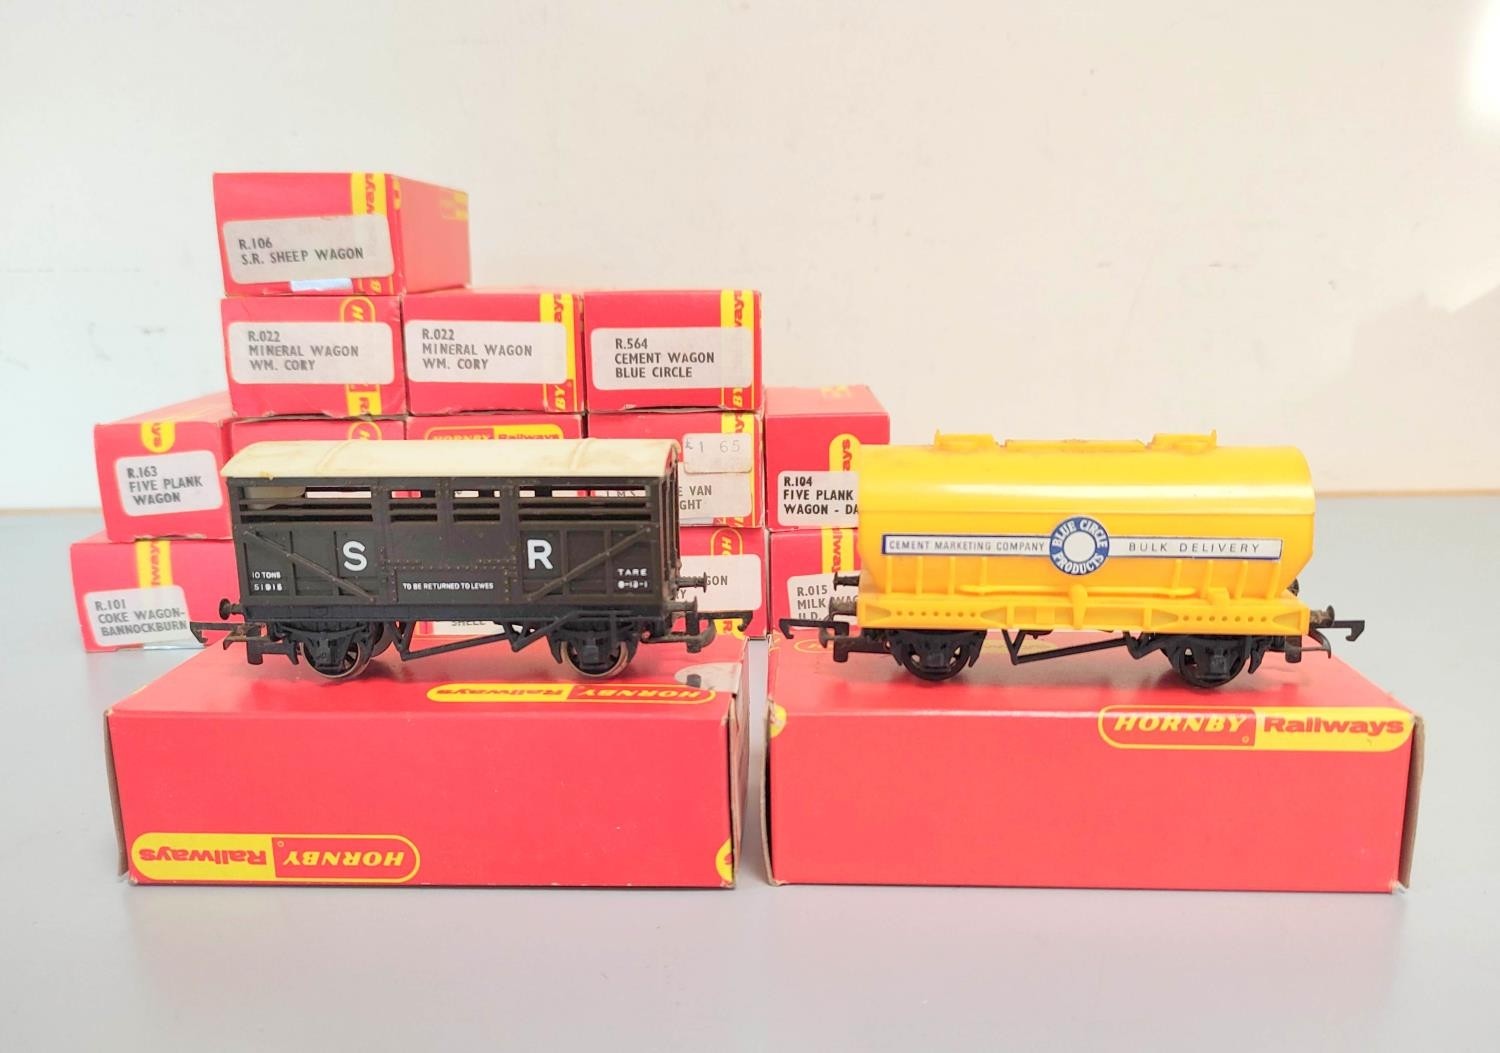 Hornby Railways. Sixteen boxed rolling stock goods vans and plank wagons to include Blue Circle